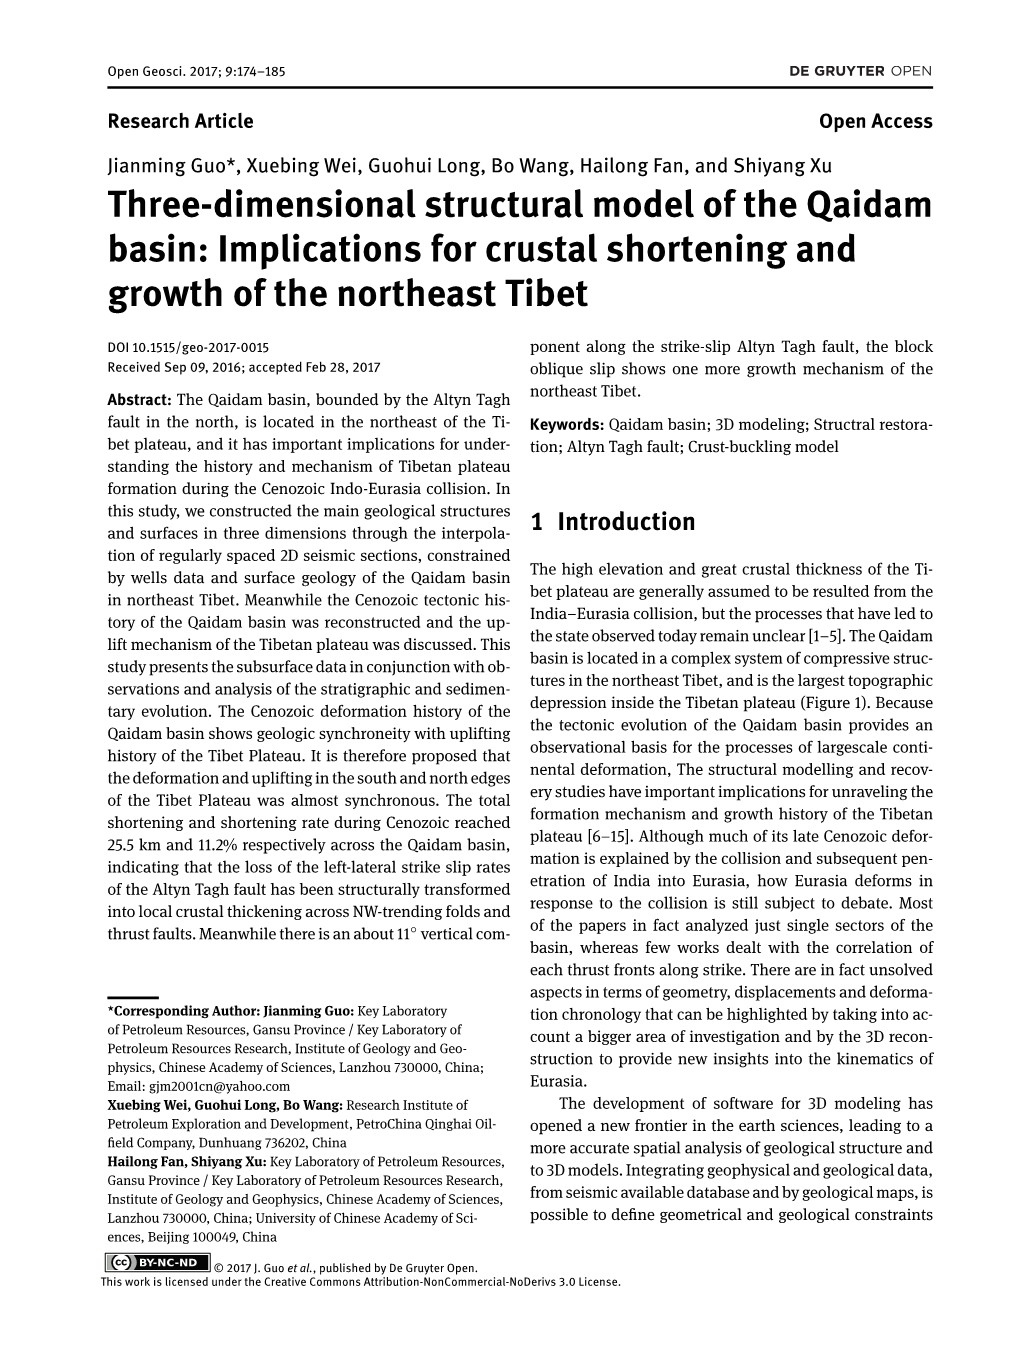 Three-Dimensional Structural Model of the Qaidam Basin: Implications for Crustal Shortening and Growth of the Northeast Tibet